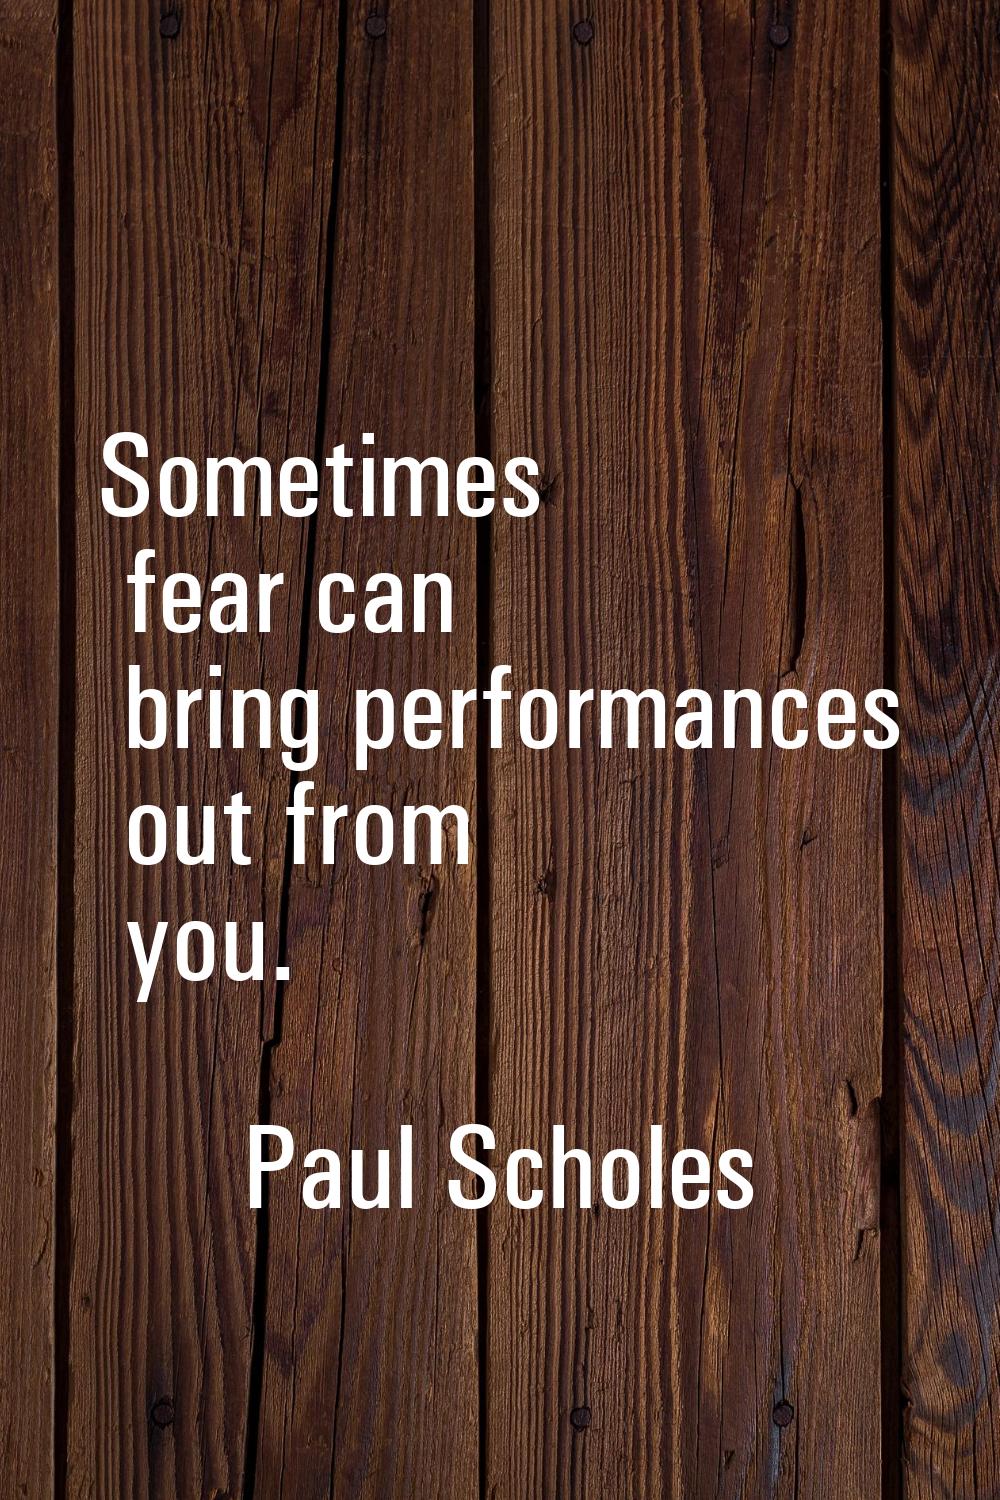 Sometimes fear can bring performances out from you.